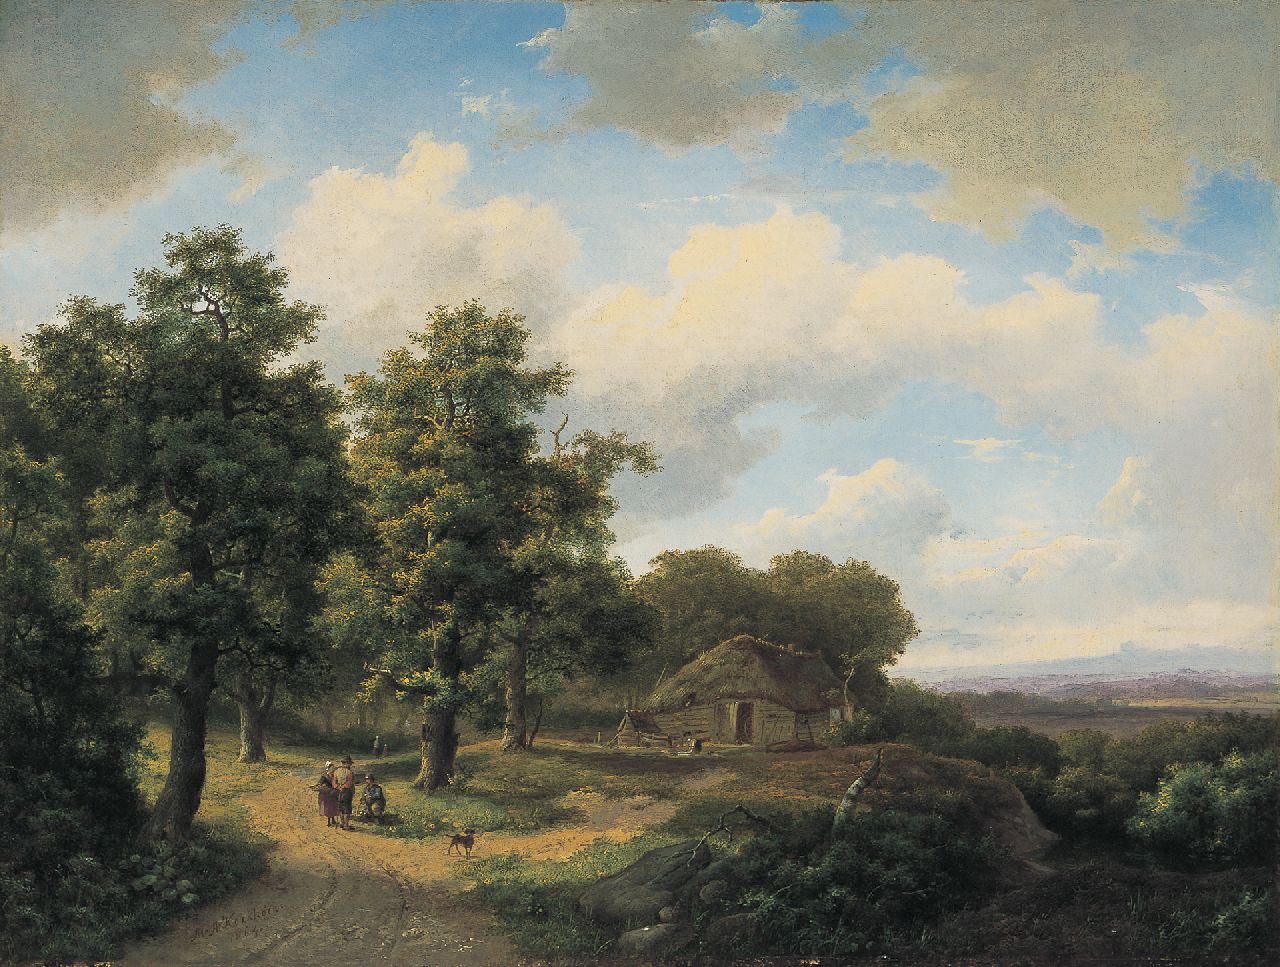 Koekkoek I M.A.  | Marinus Adrianus Koekkoek I, Travellers on a country lane, oil on canvas 46.7 x 61.7 cm, signed l.l. and dated 1864